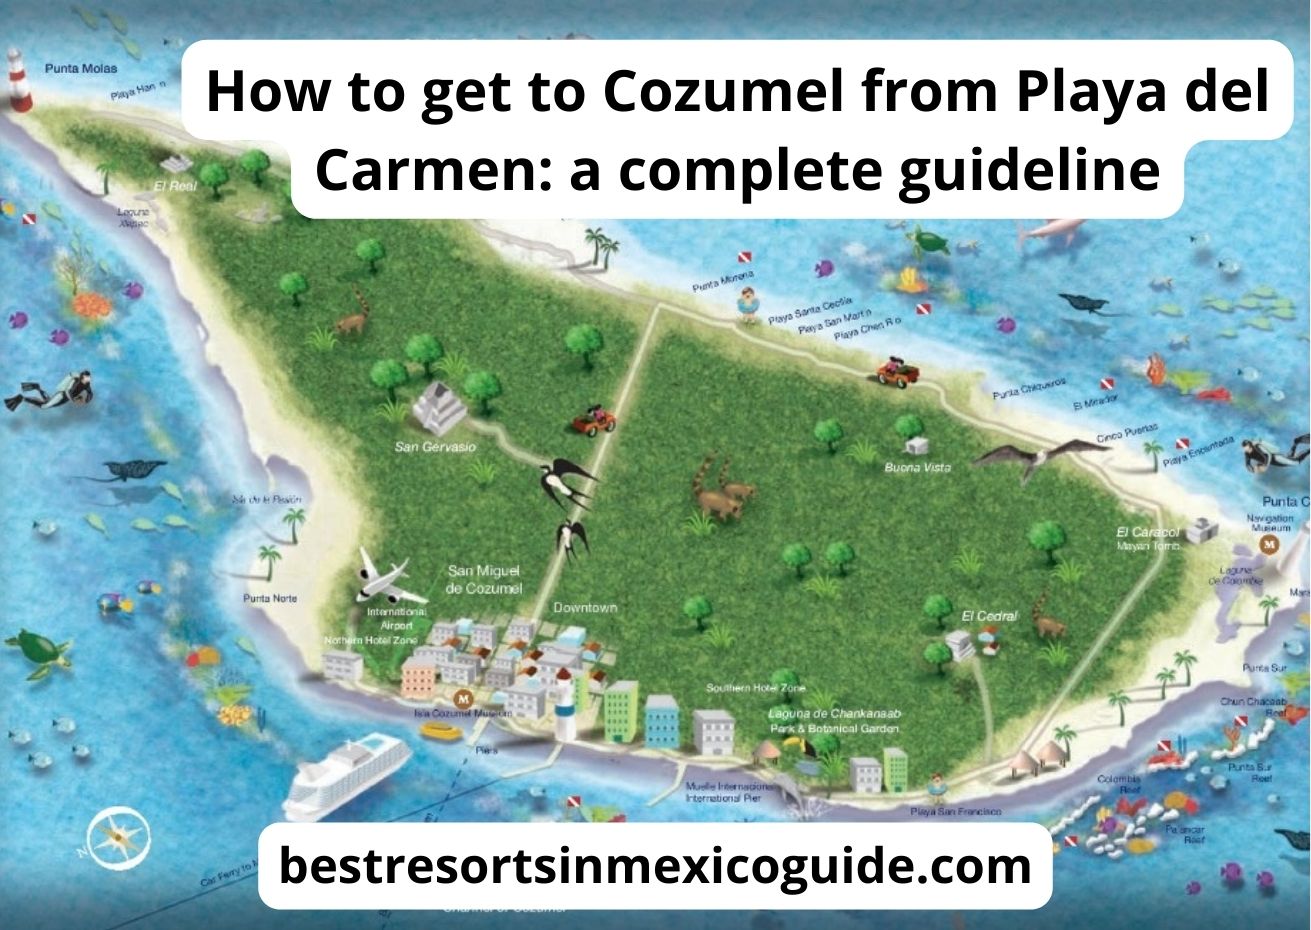 How to get to Cozumel from Playa del Carmen? The best guide (15+ tips)